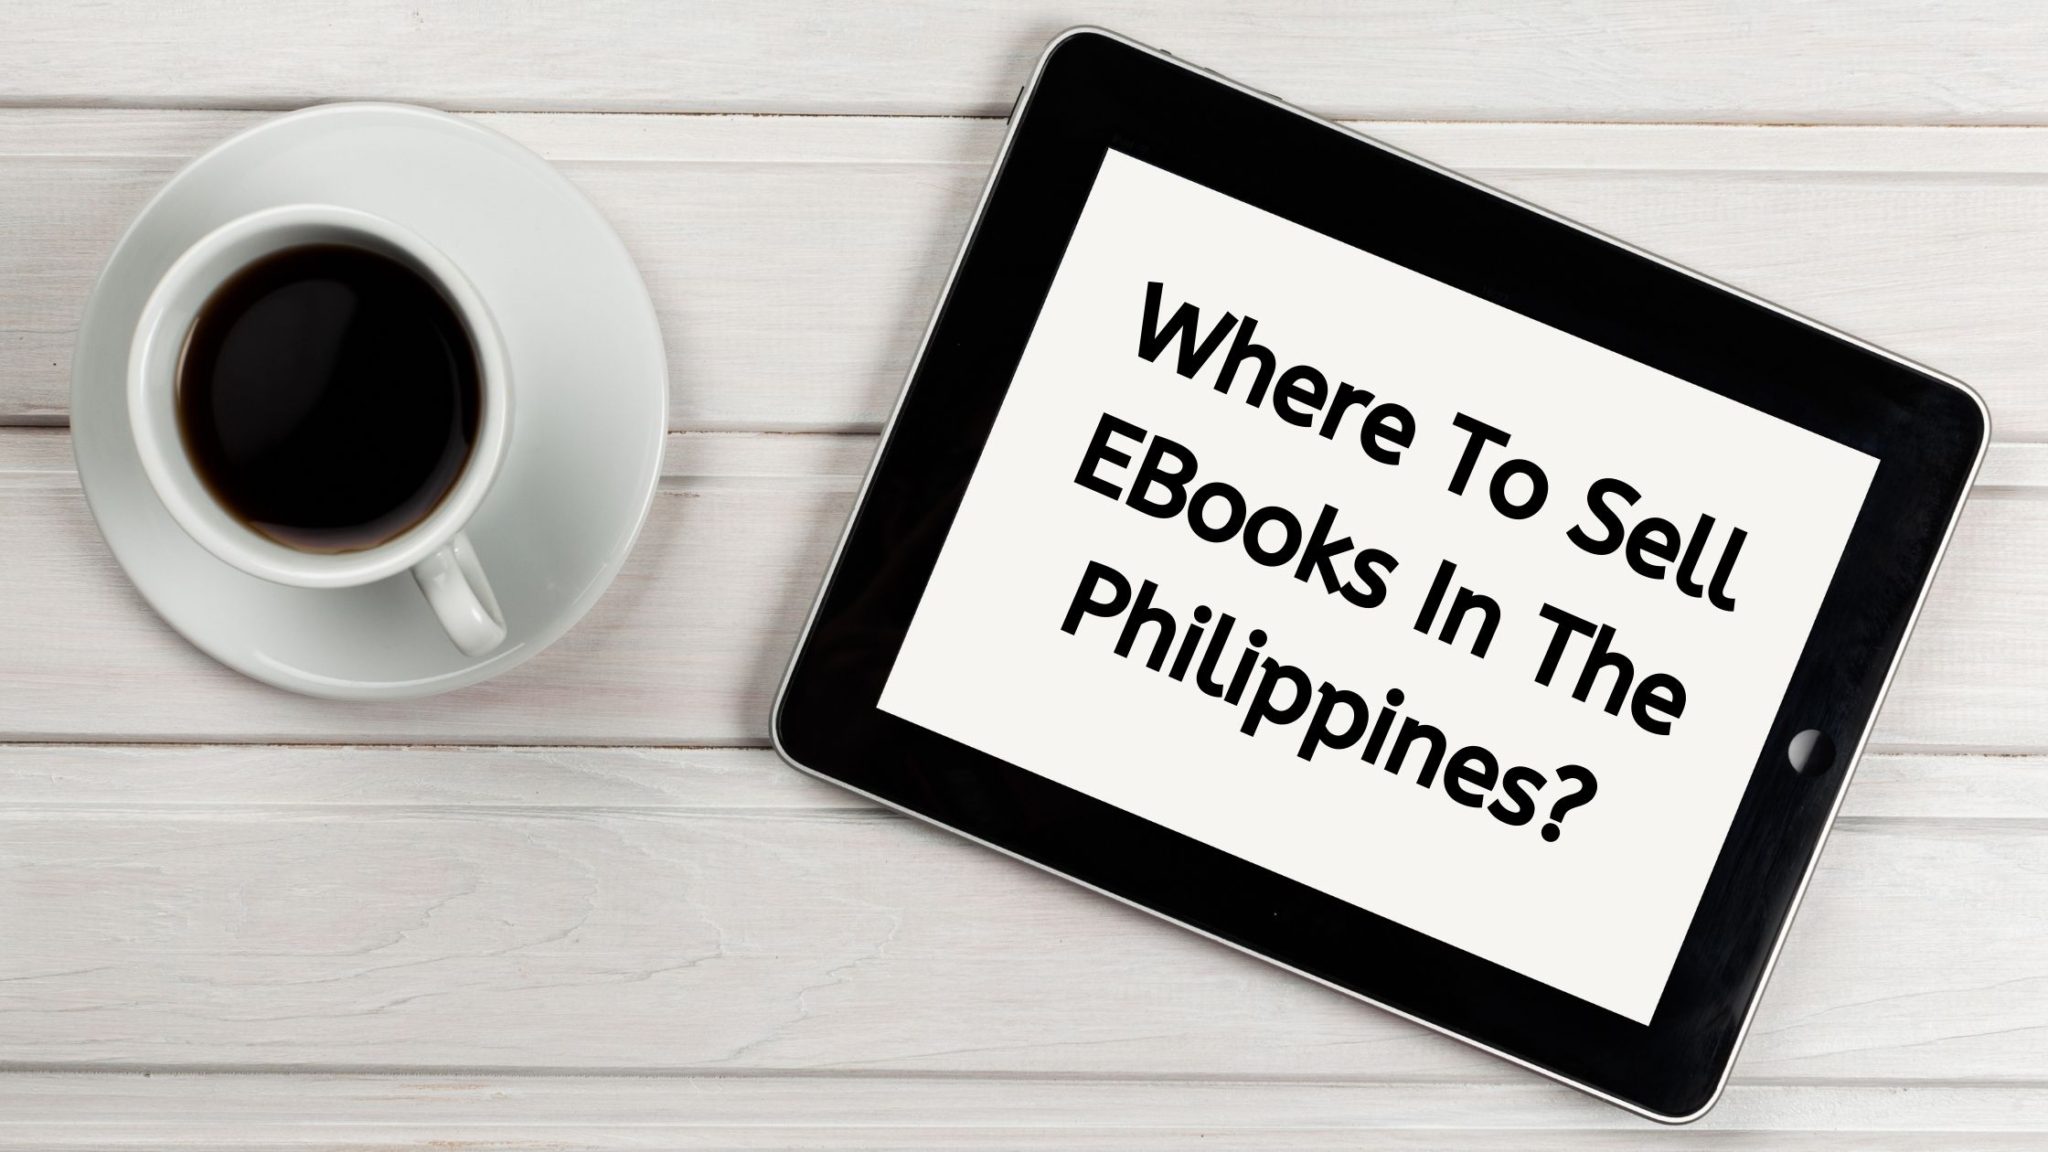 Where To Sell EBooks in the Philippines